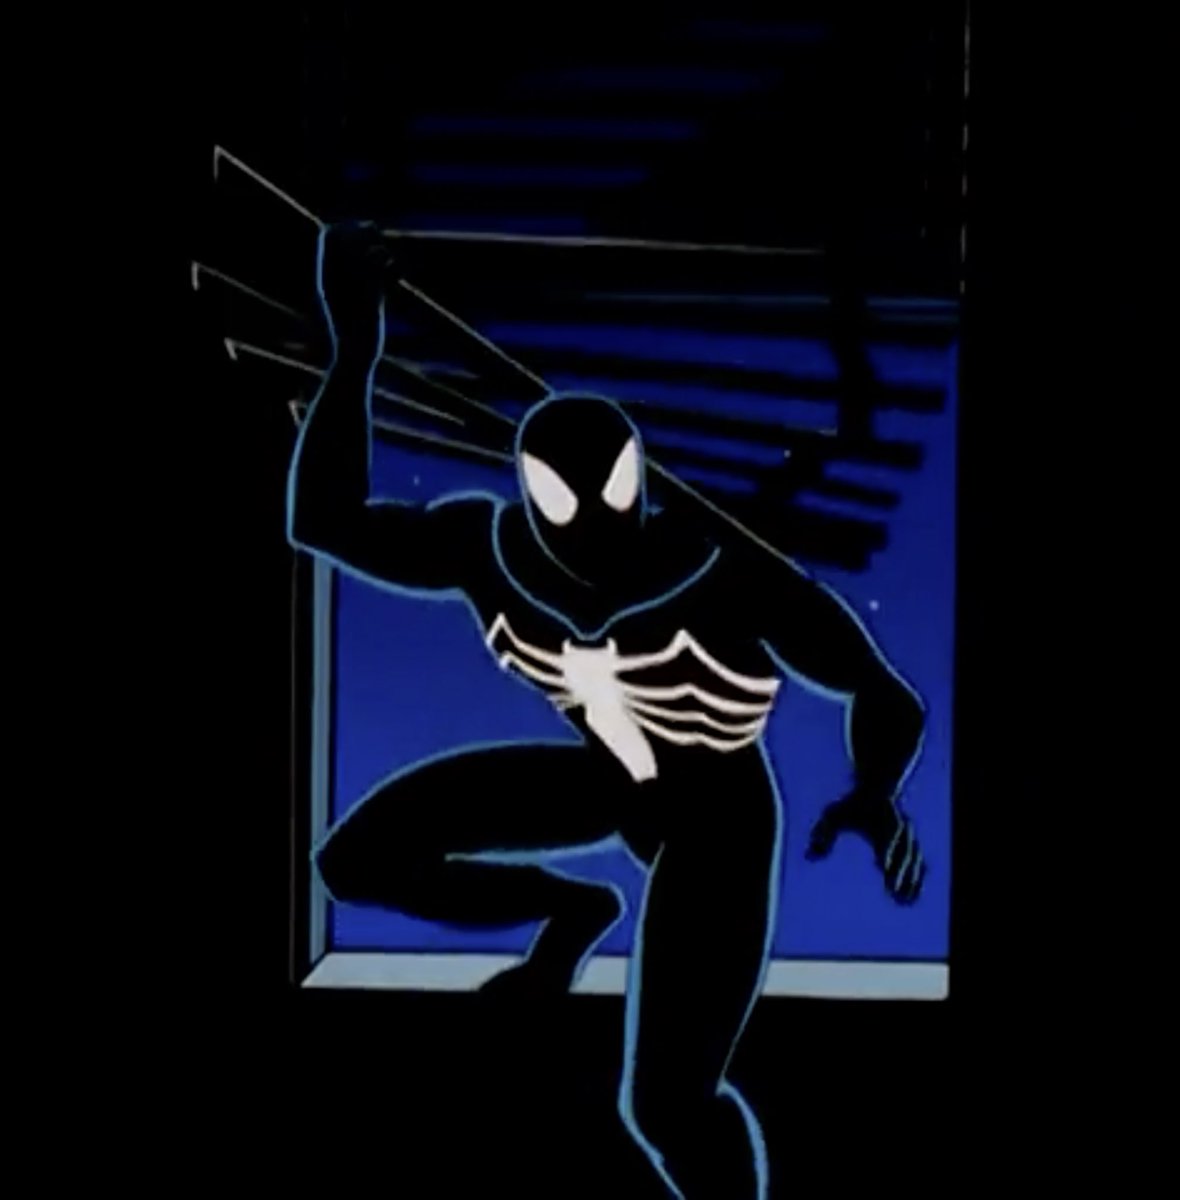 RT @REAL_EARTH_9811: Symbiote suit from Spider-Man Unlimited https://t.co/h4j8XIriO0